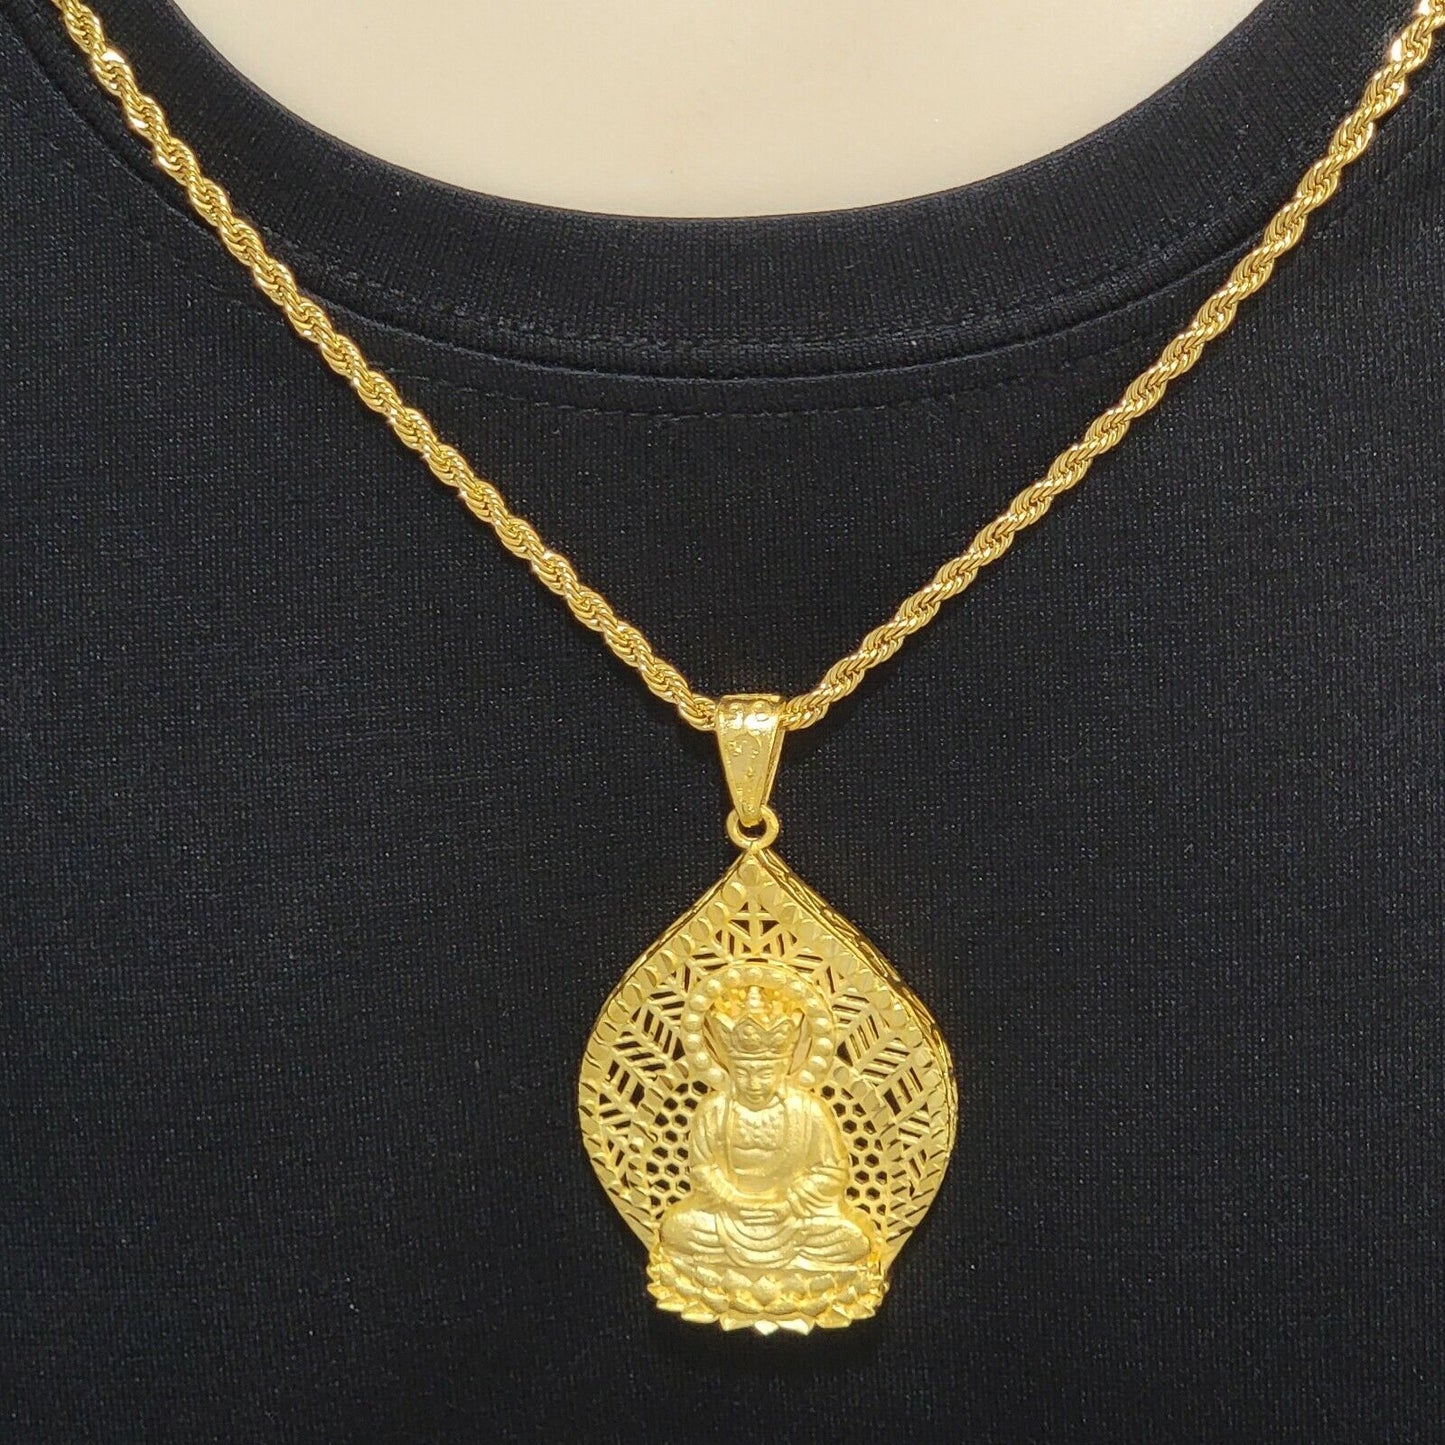 Necklaces - Stainless Steel Gold Plated. Buddha Pendant & Chain.